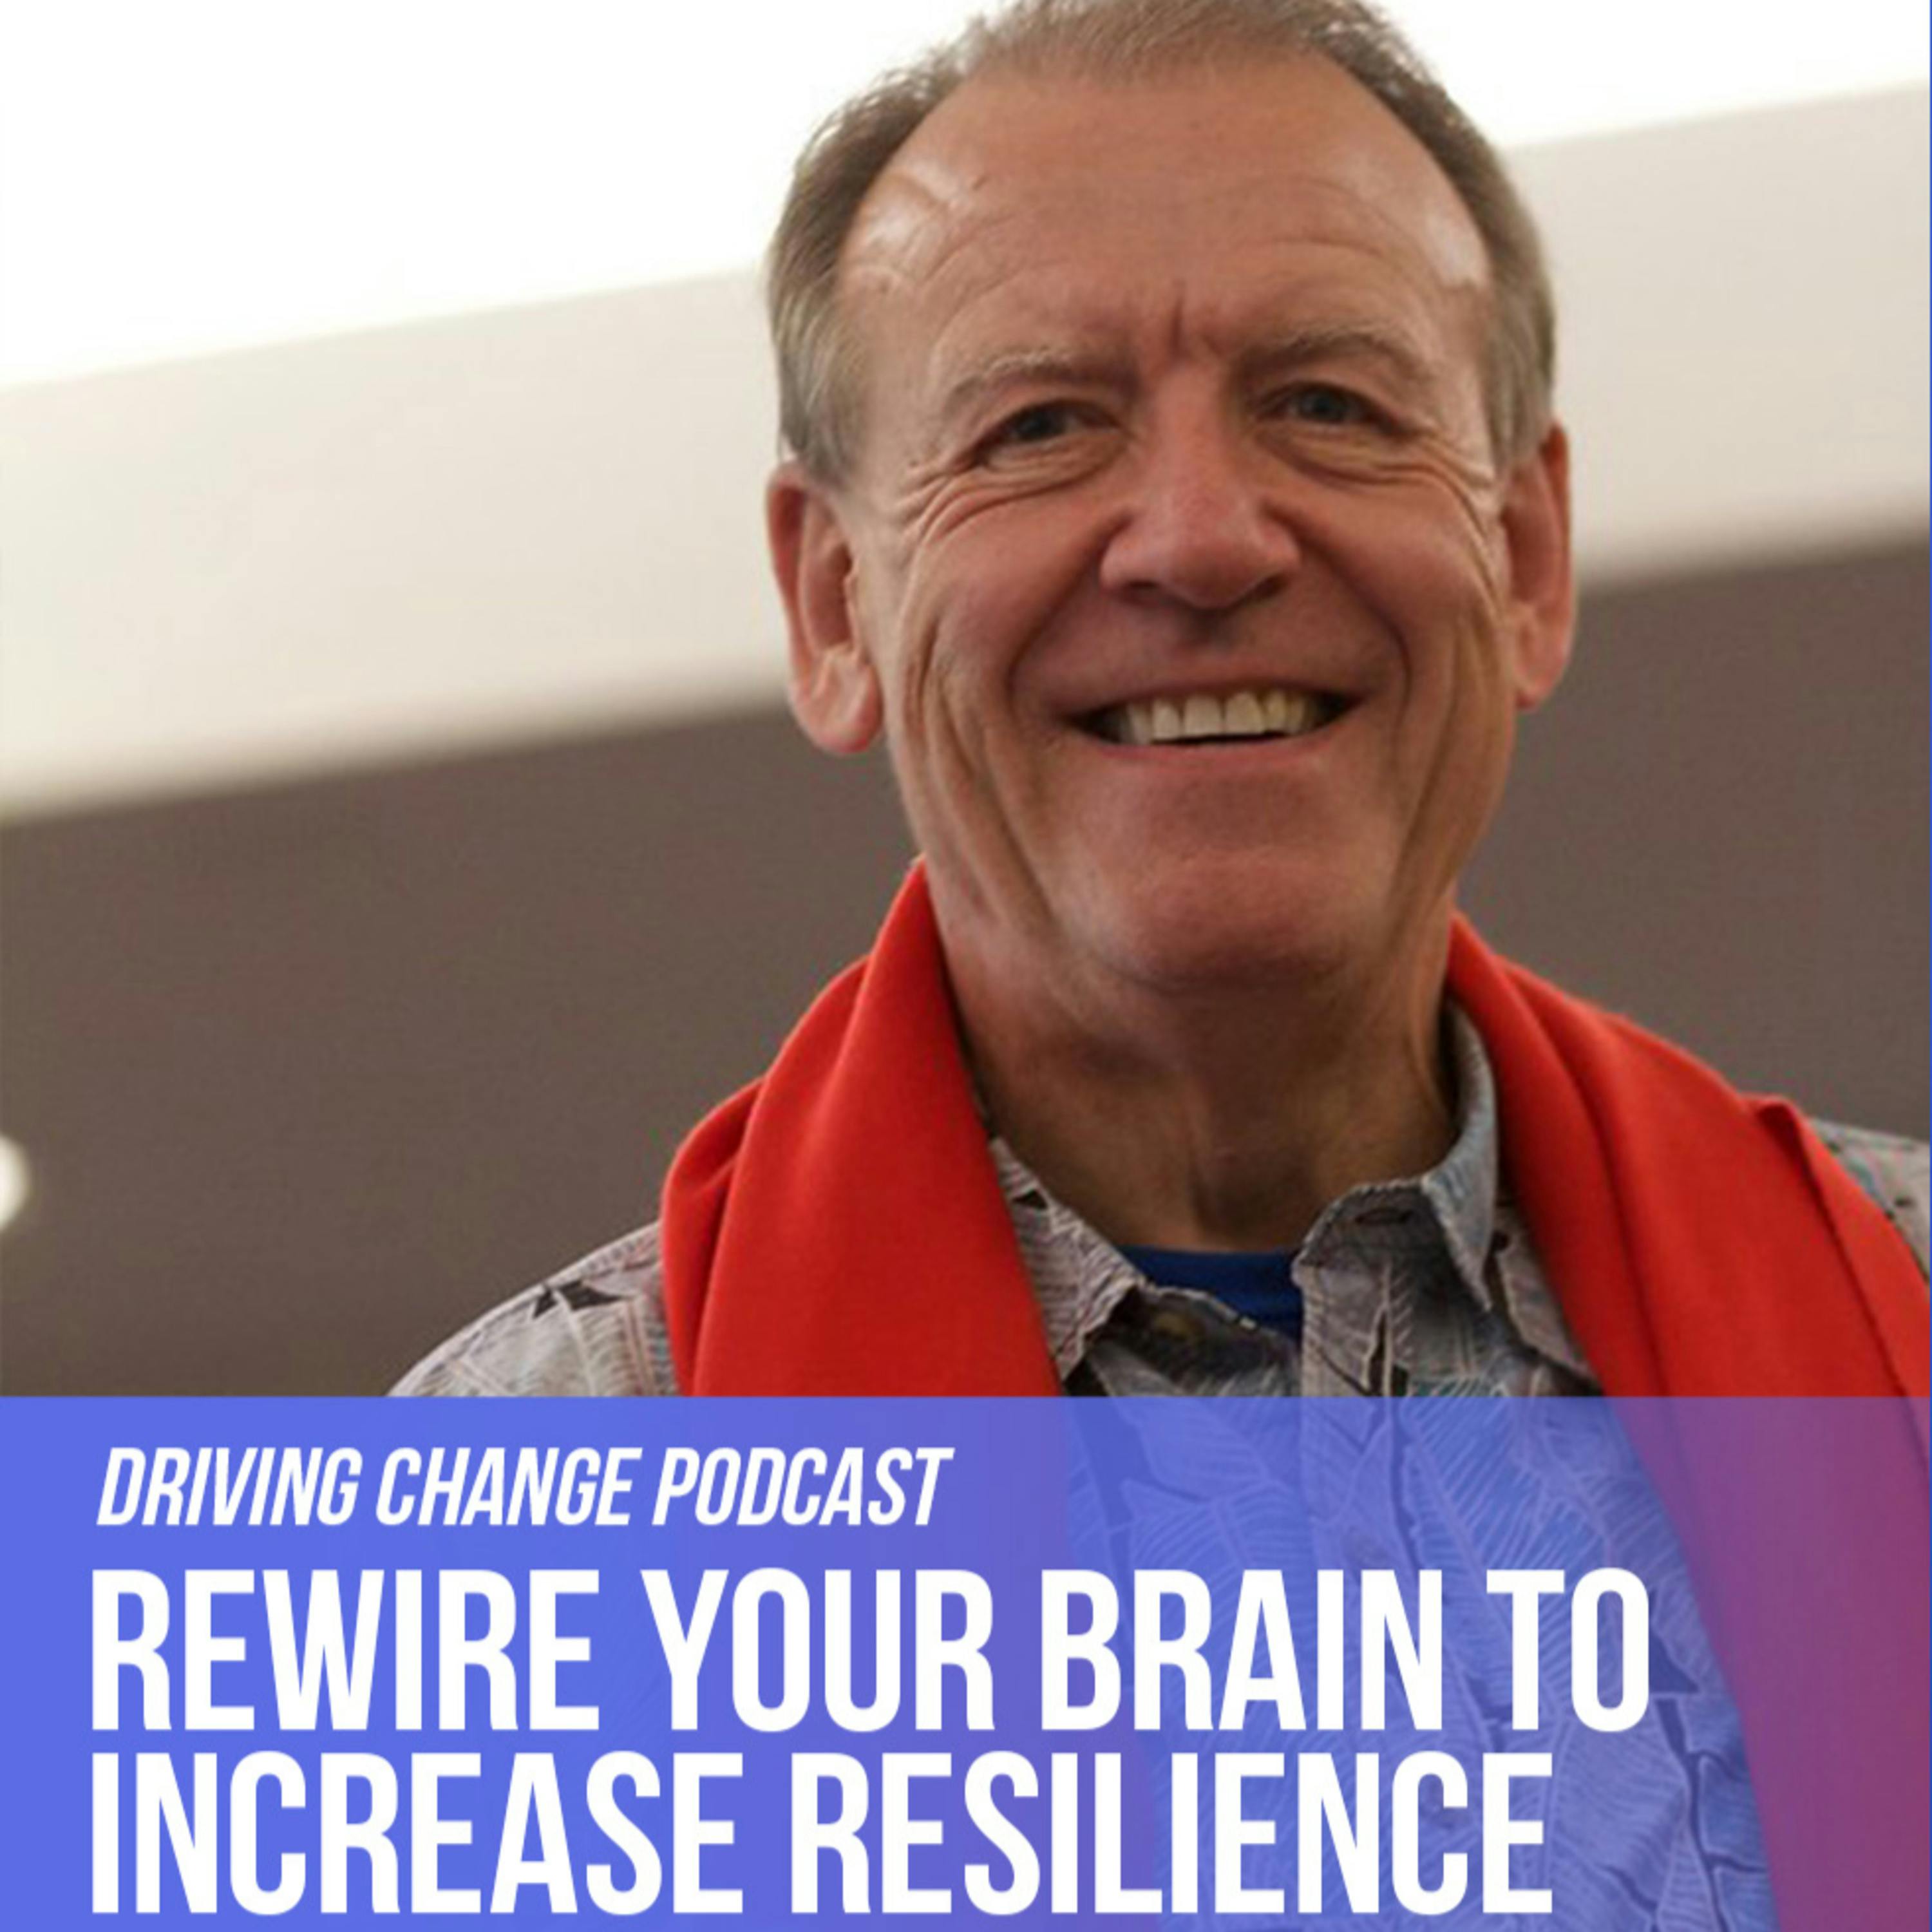 Dr. Dawson Church: Rewire Your Brain To Increase Resilience